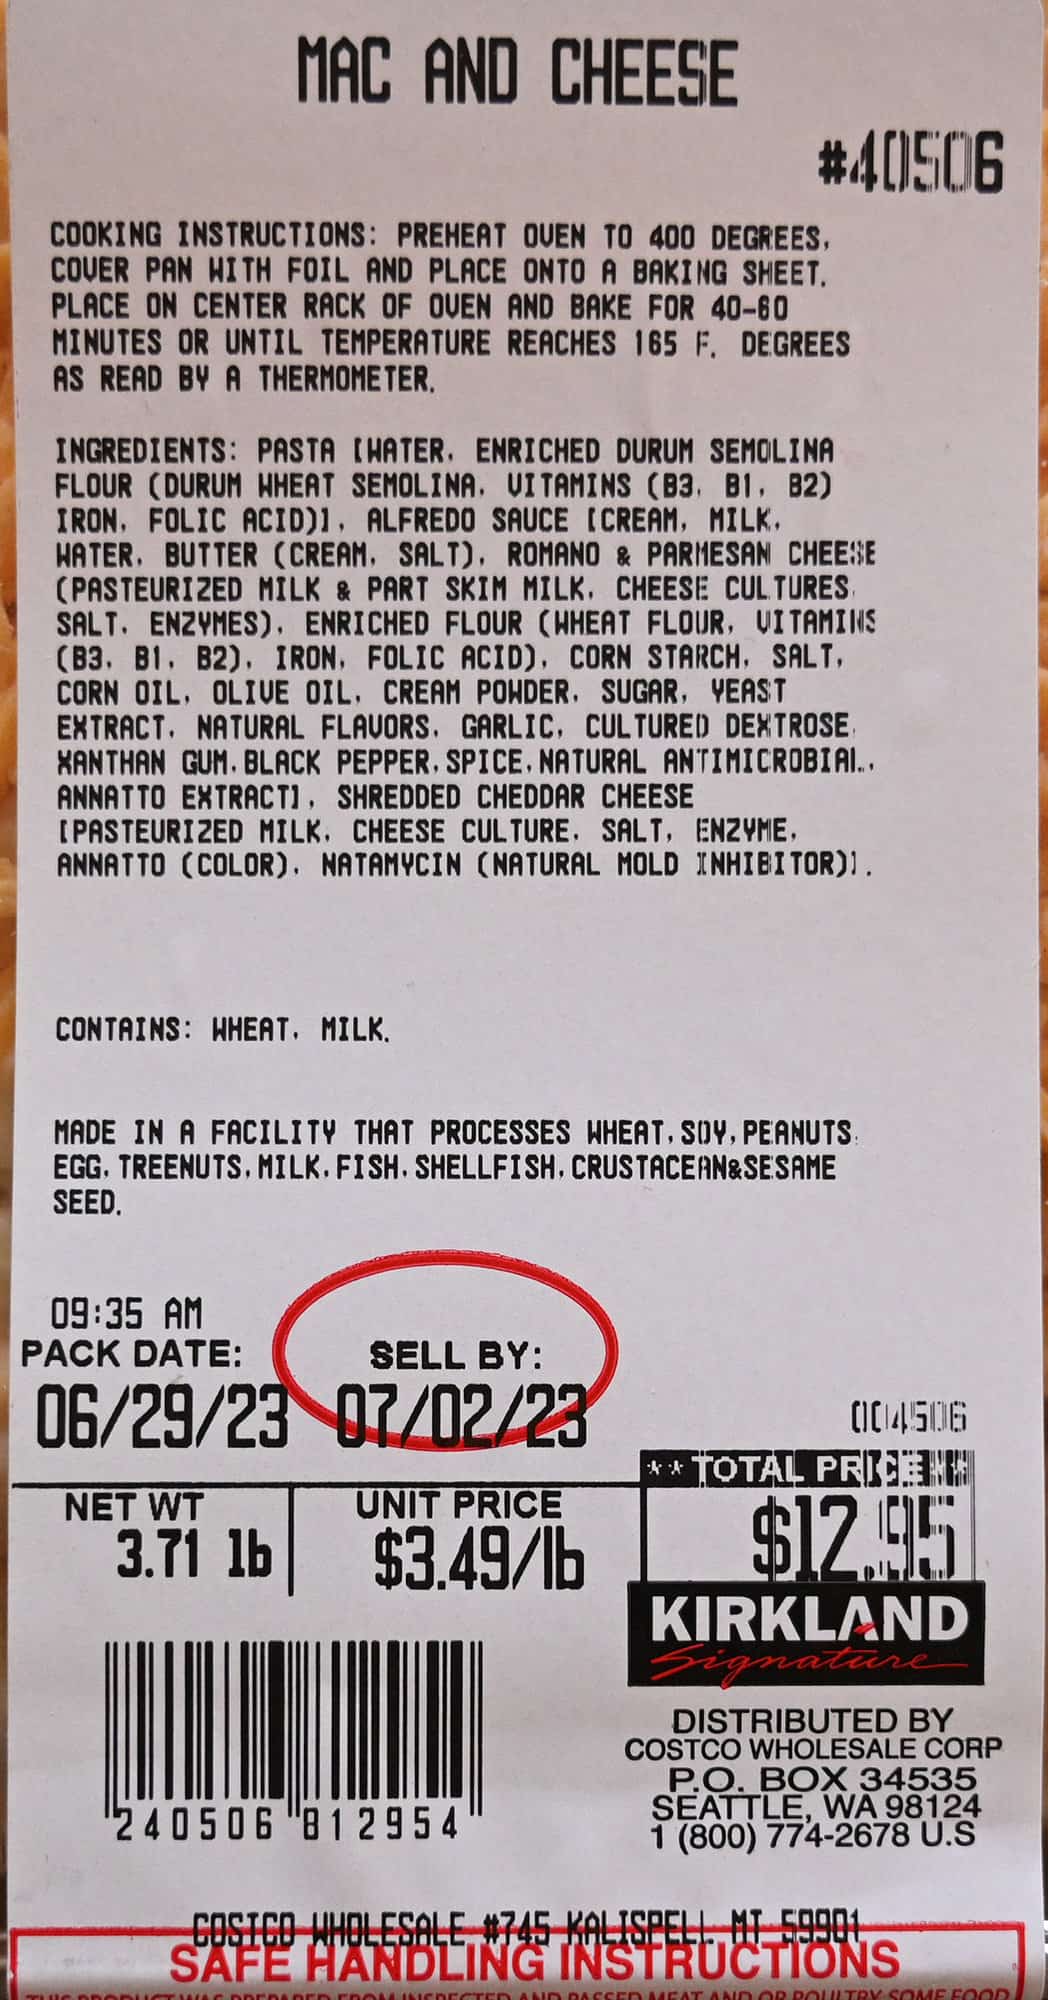 Closeup image of  the front label on the mac and cheese showing cooking instructions, ingredients, best before date and cost.